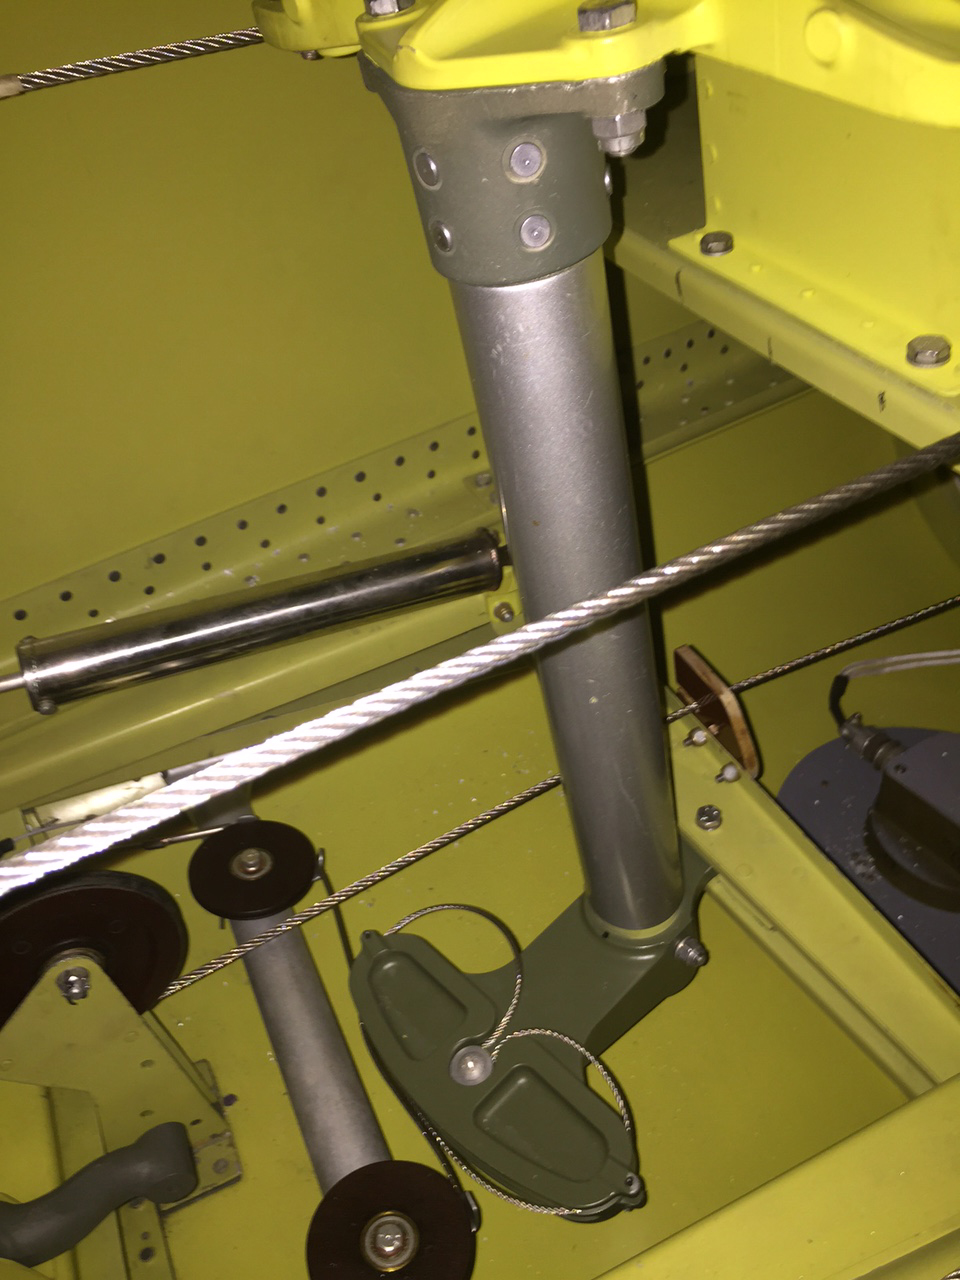 Part of the tail wheel steering mechanism. (photo via Tom Reilly)